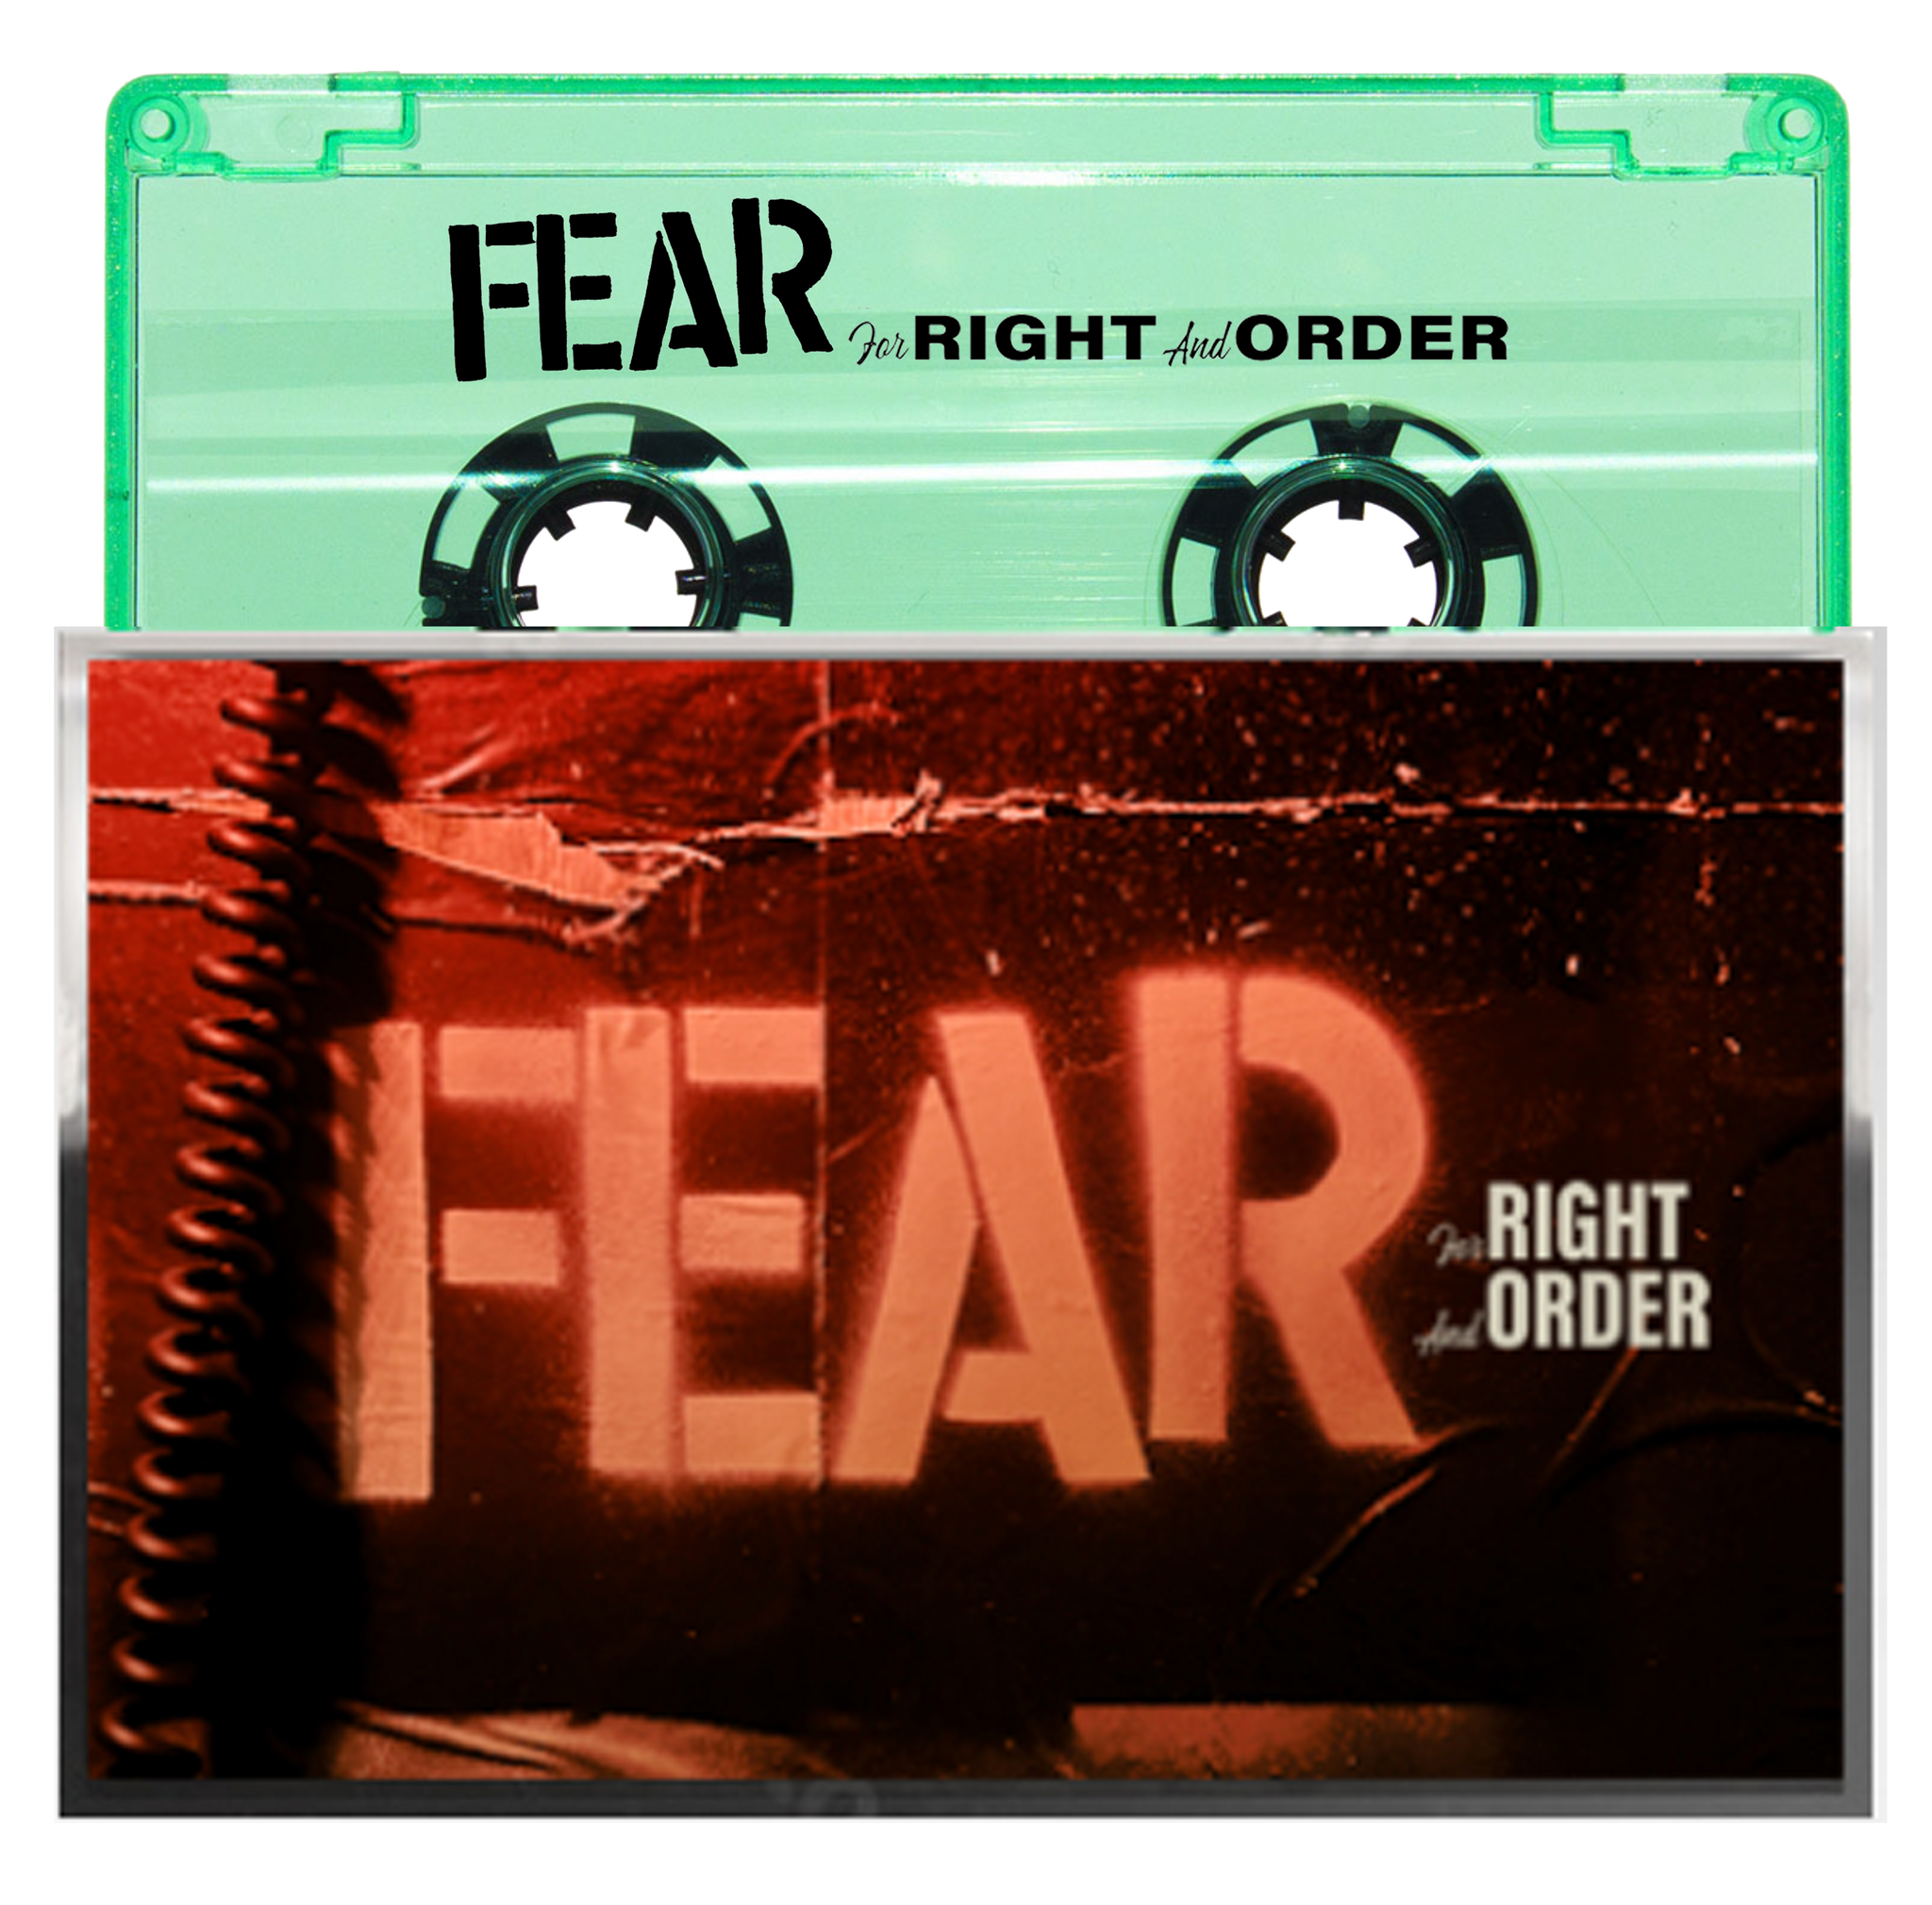 FEAR "FOR RIGHT AND ORDER" LIMITED EDTION COKE BOTTLE CLEAR CASSETTE (FEATURES  BONUS TRACKS) - PRE ORDER